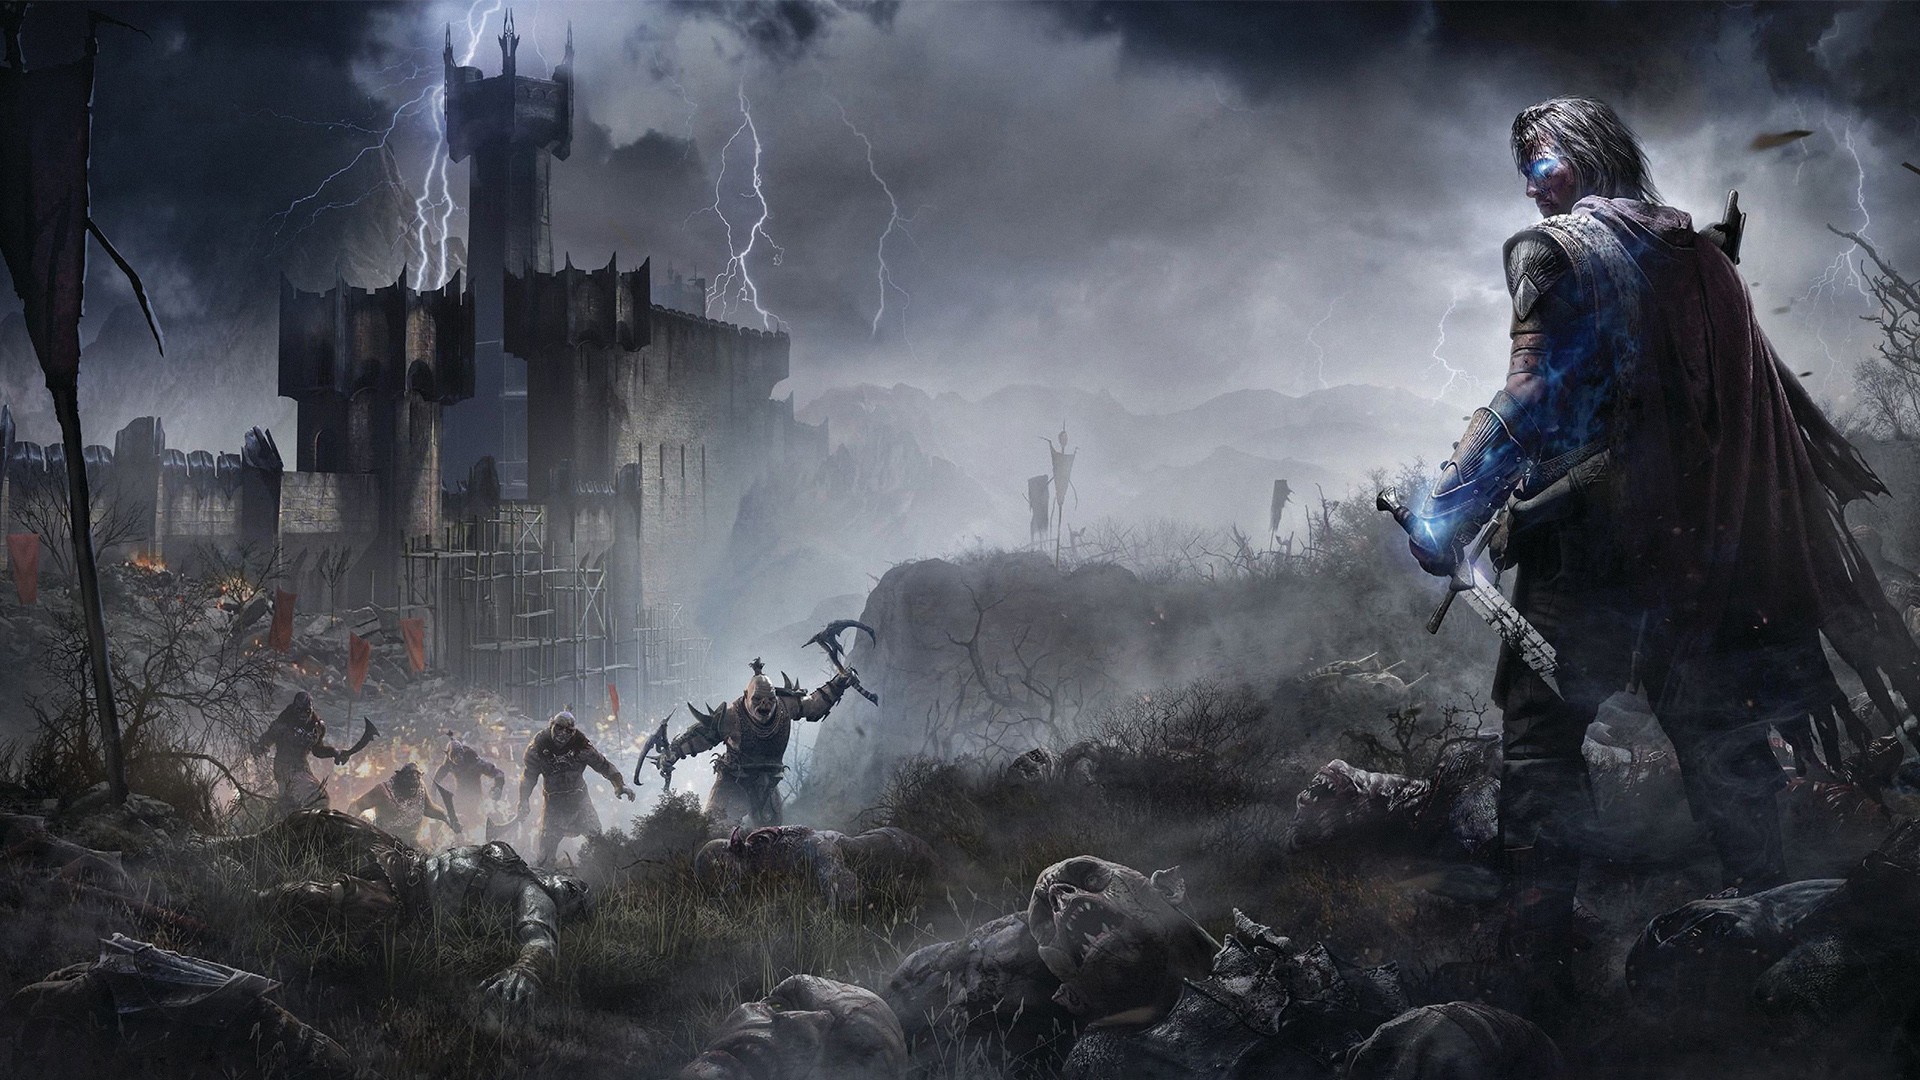 1920x1080 Promo Artwork - Characters & Art - Middle-earth: Shadow of Mordor